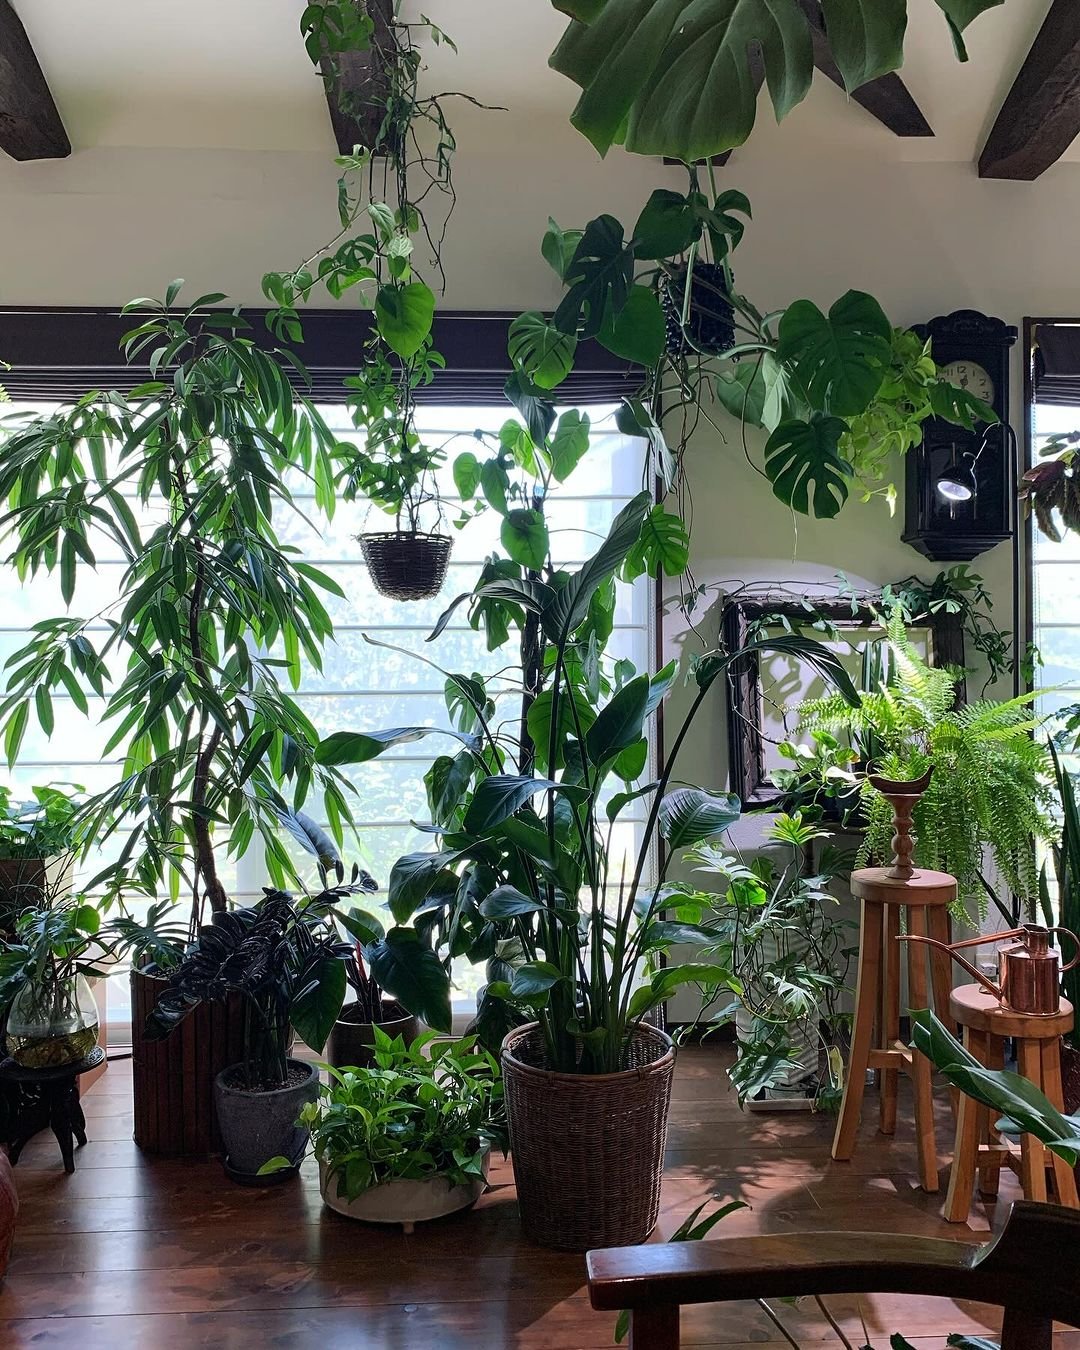 A room filled with various plants and furniture, creating a cozy and green environment.